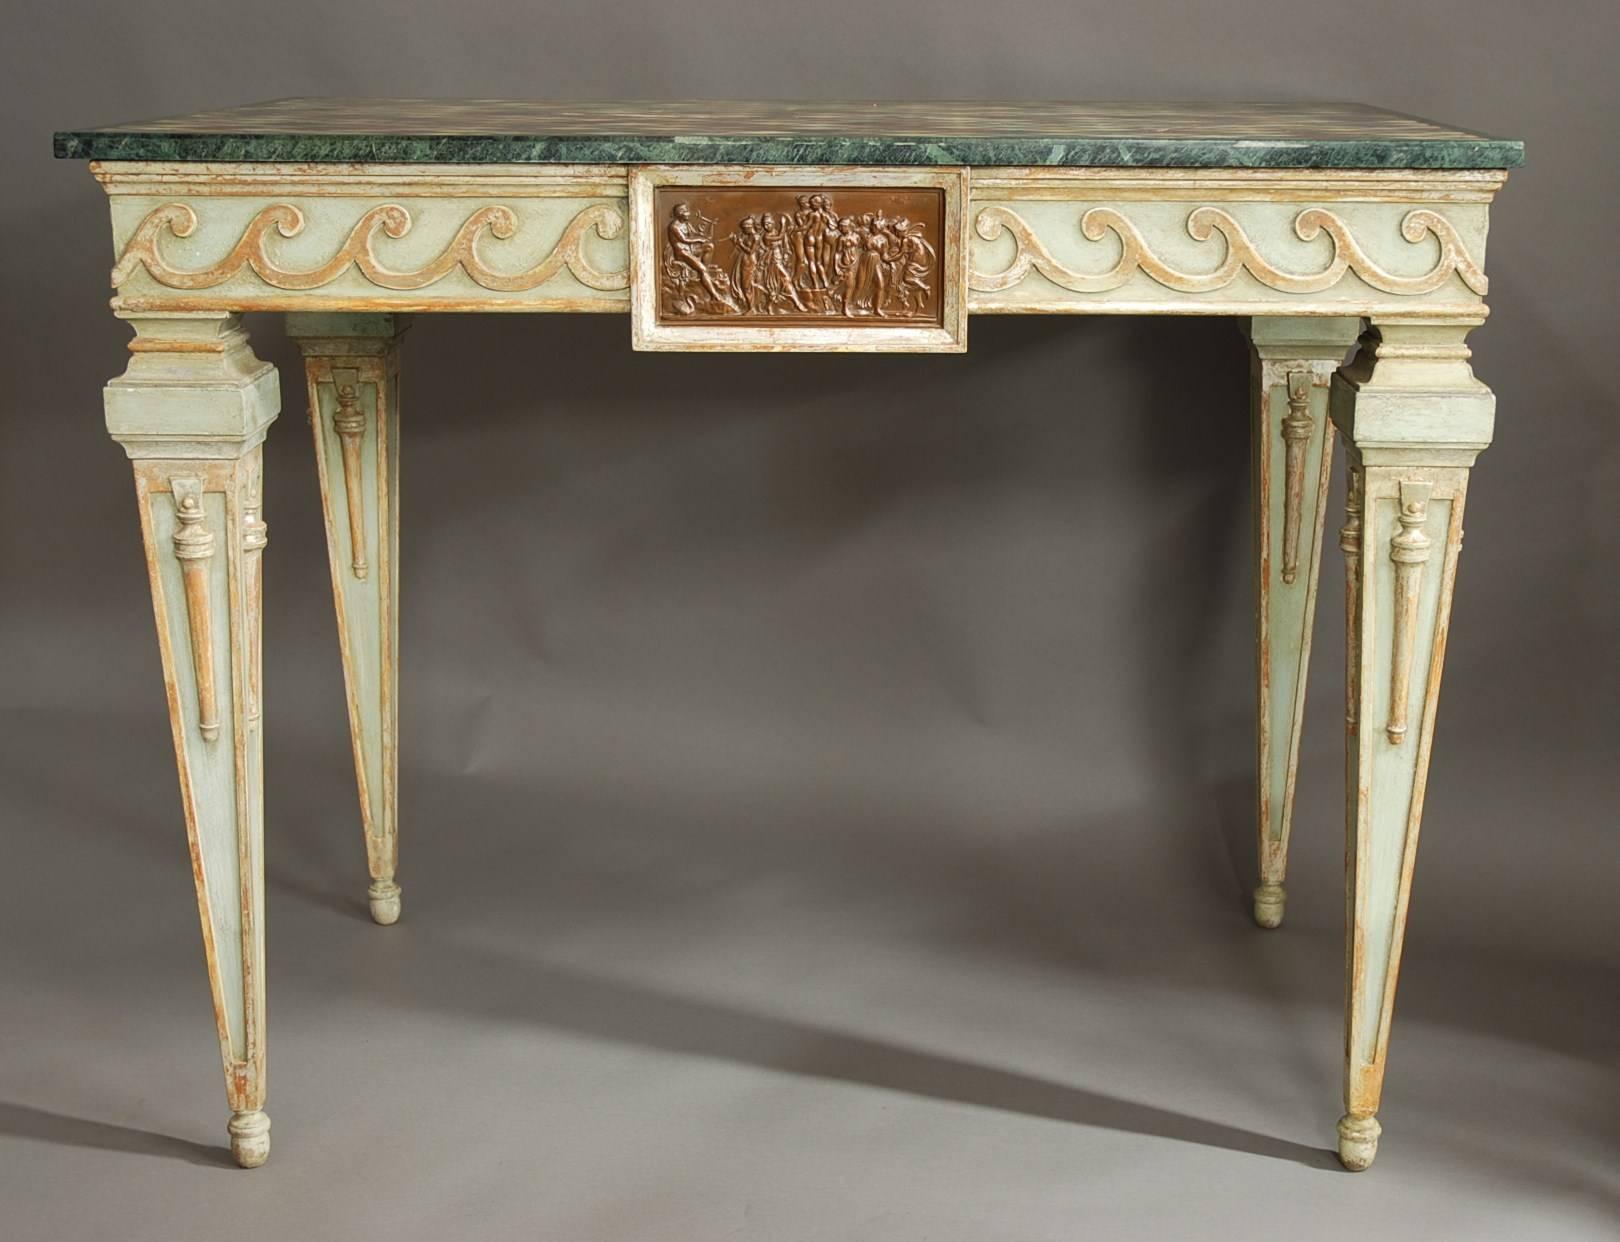 Highly Decorative Pair of Early 20th Century Italian Painted Console Tables In Good Condition For Sale In Suffolk, GB